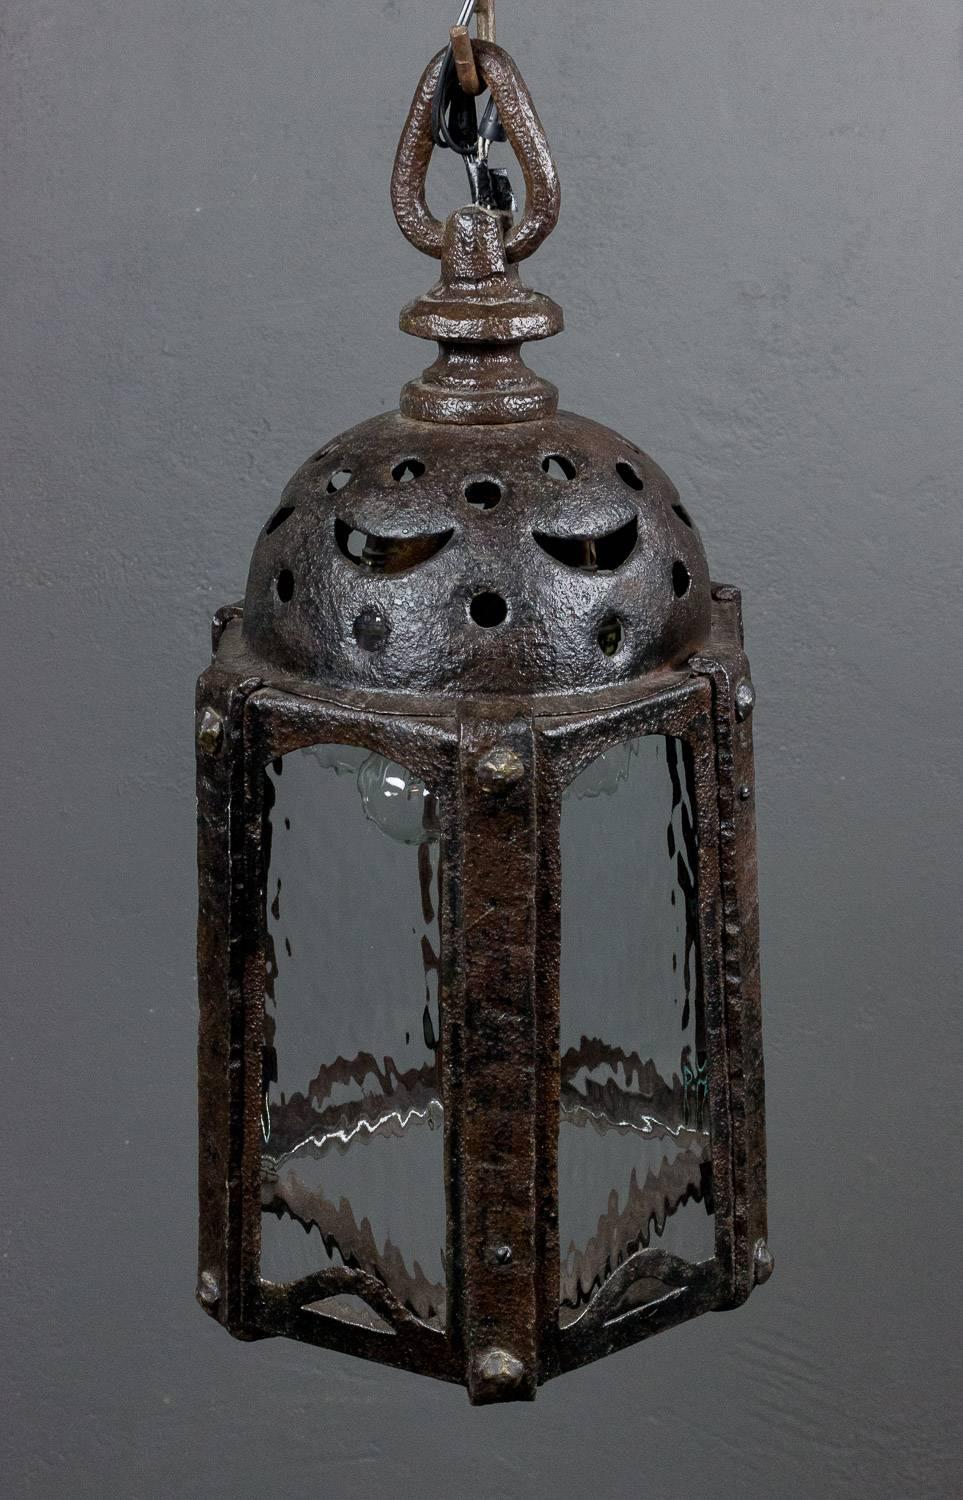 French 1920s wrought iron lantern with Moorish detail and textured glass.
Measures: 25